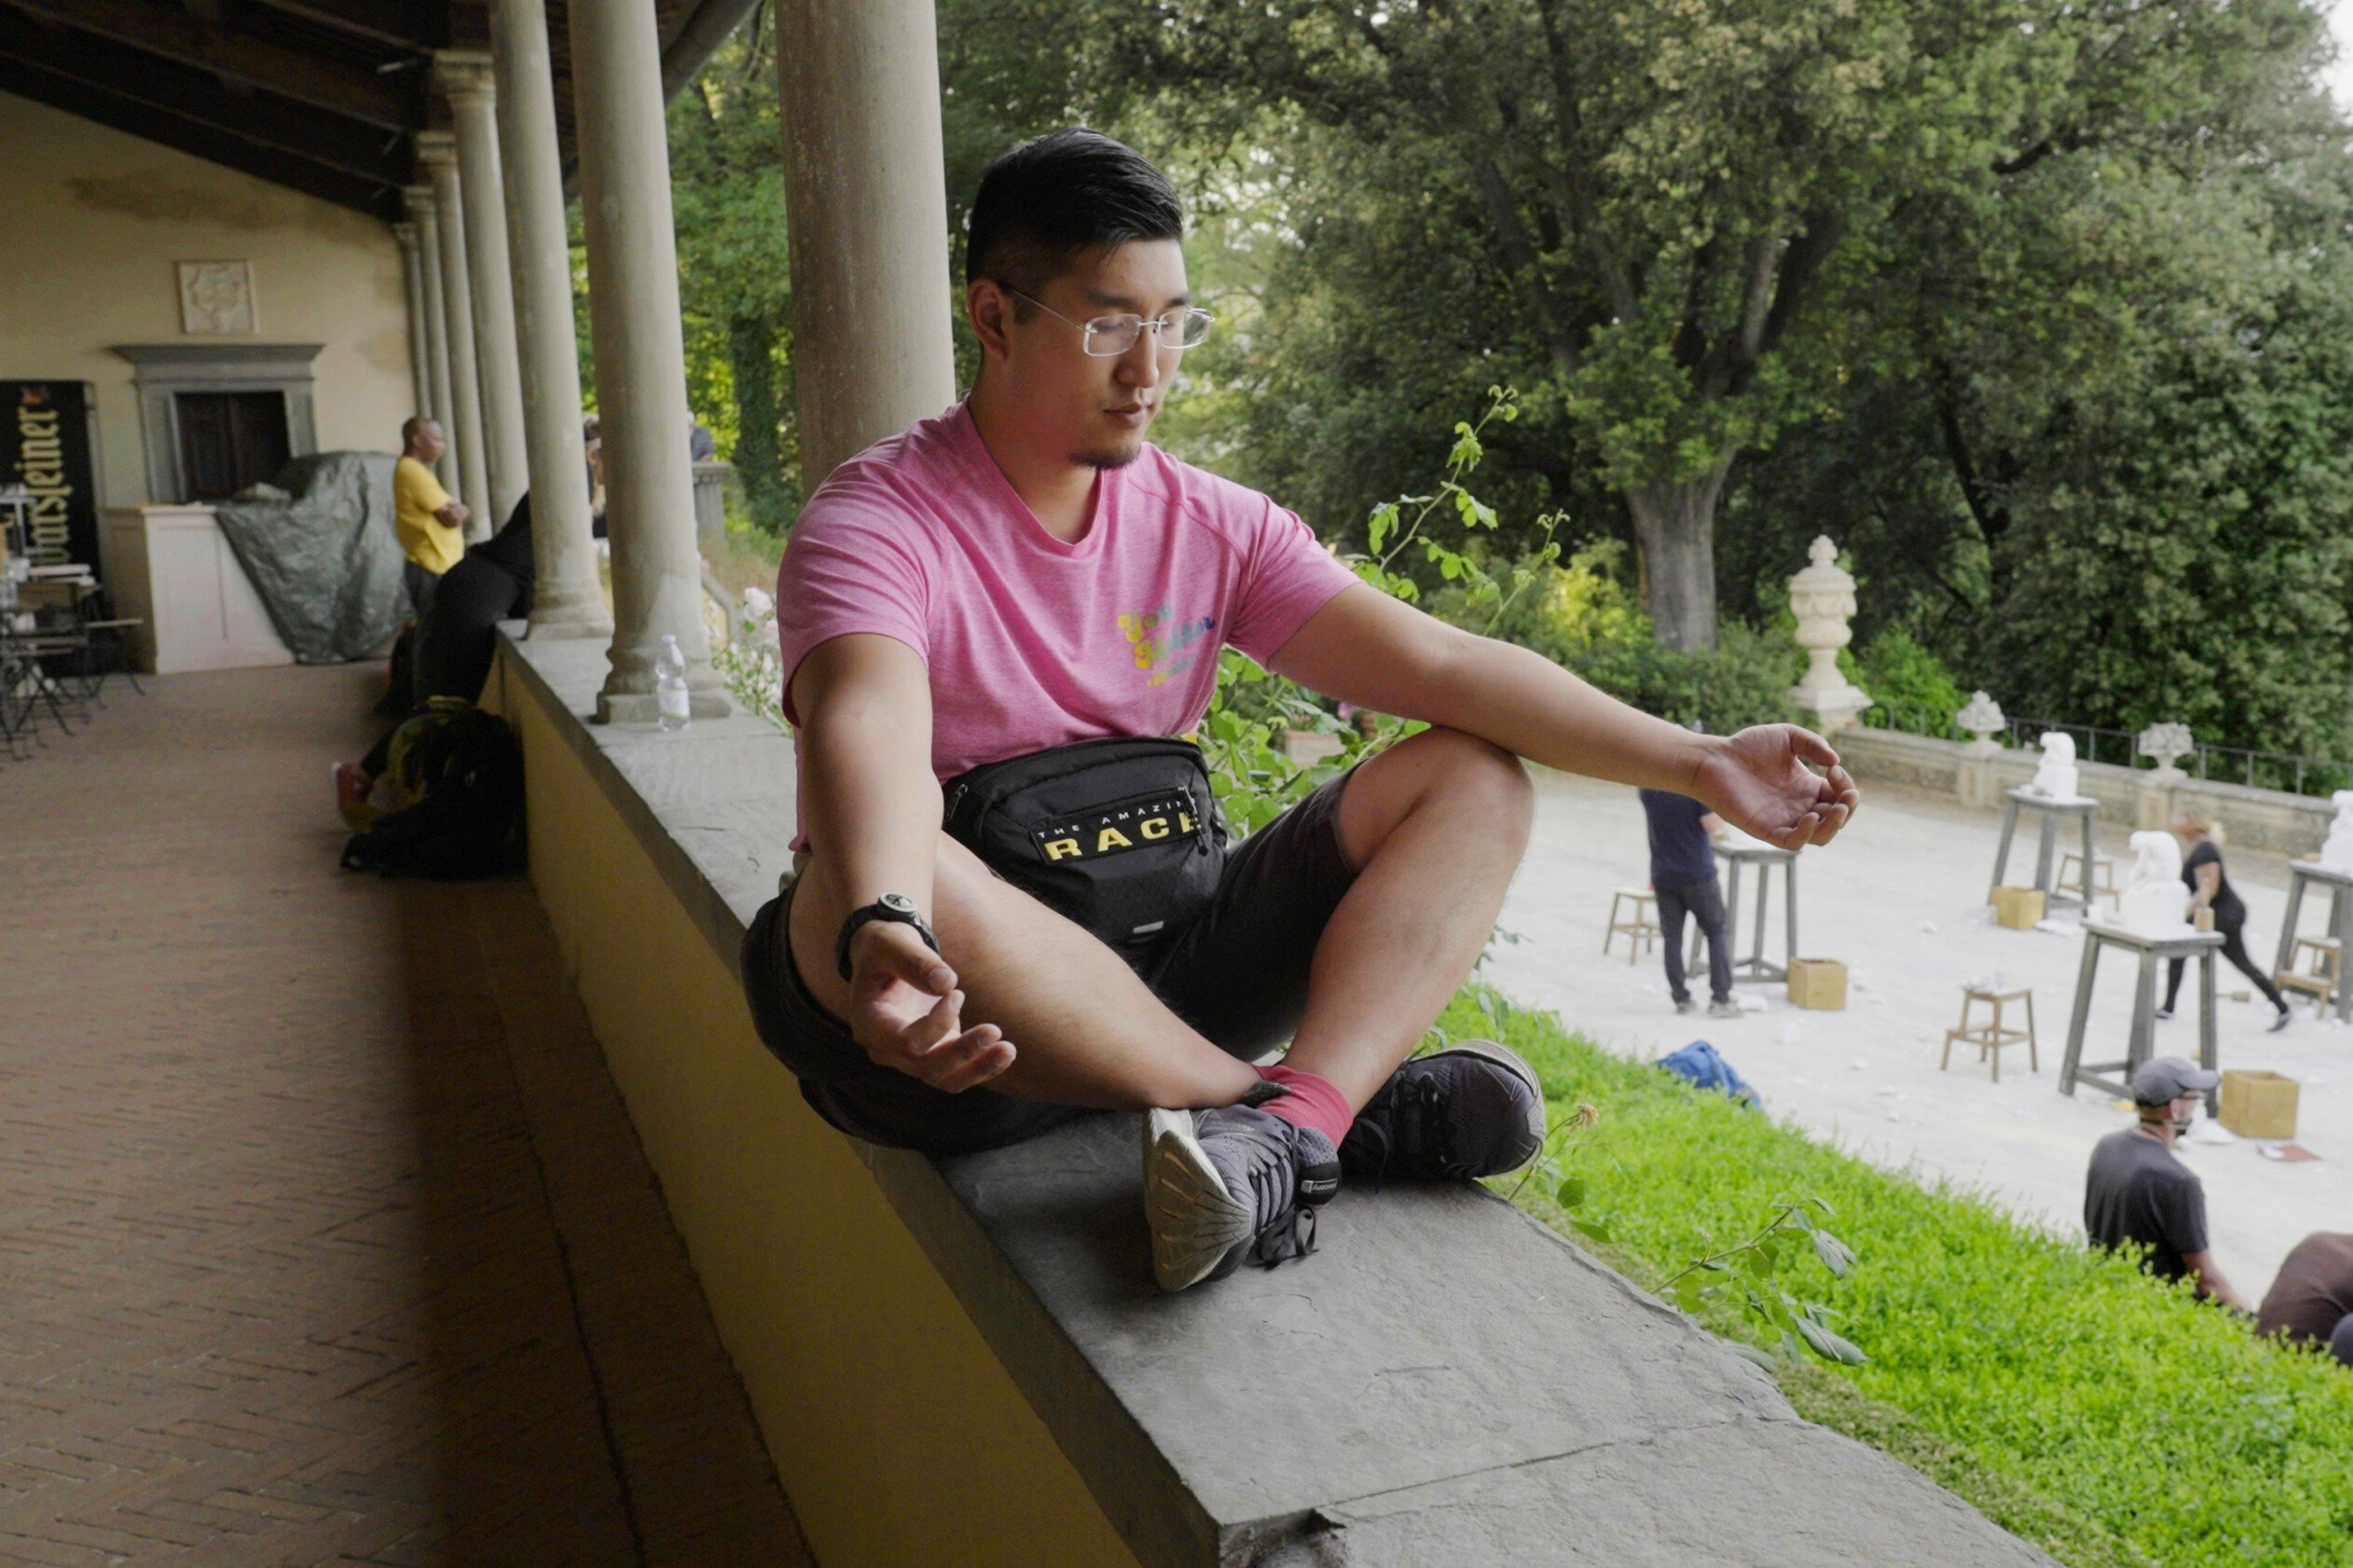 Rich Kuo who stars in 'The Amazing Race' Season 34 Episode 4, which airs tonight, Oct. 12, wears a pink shirt and black shorts while meditating.